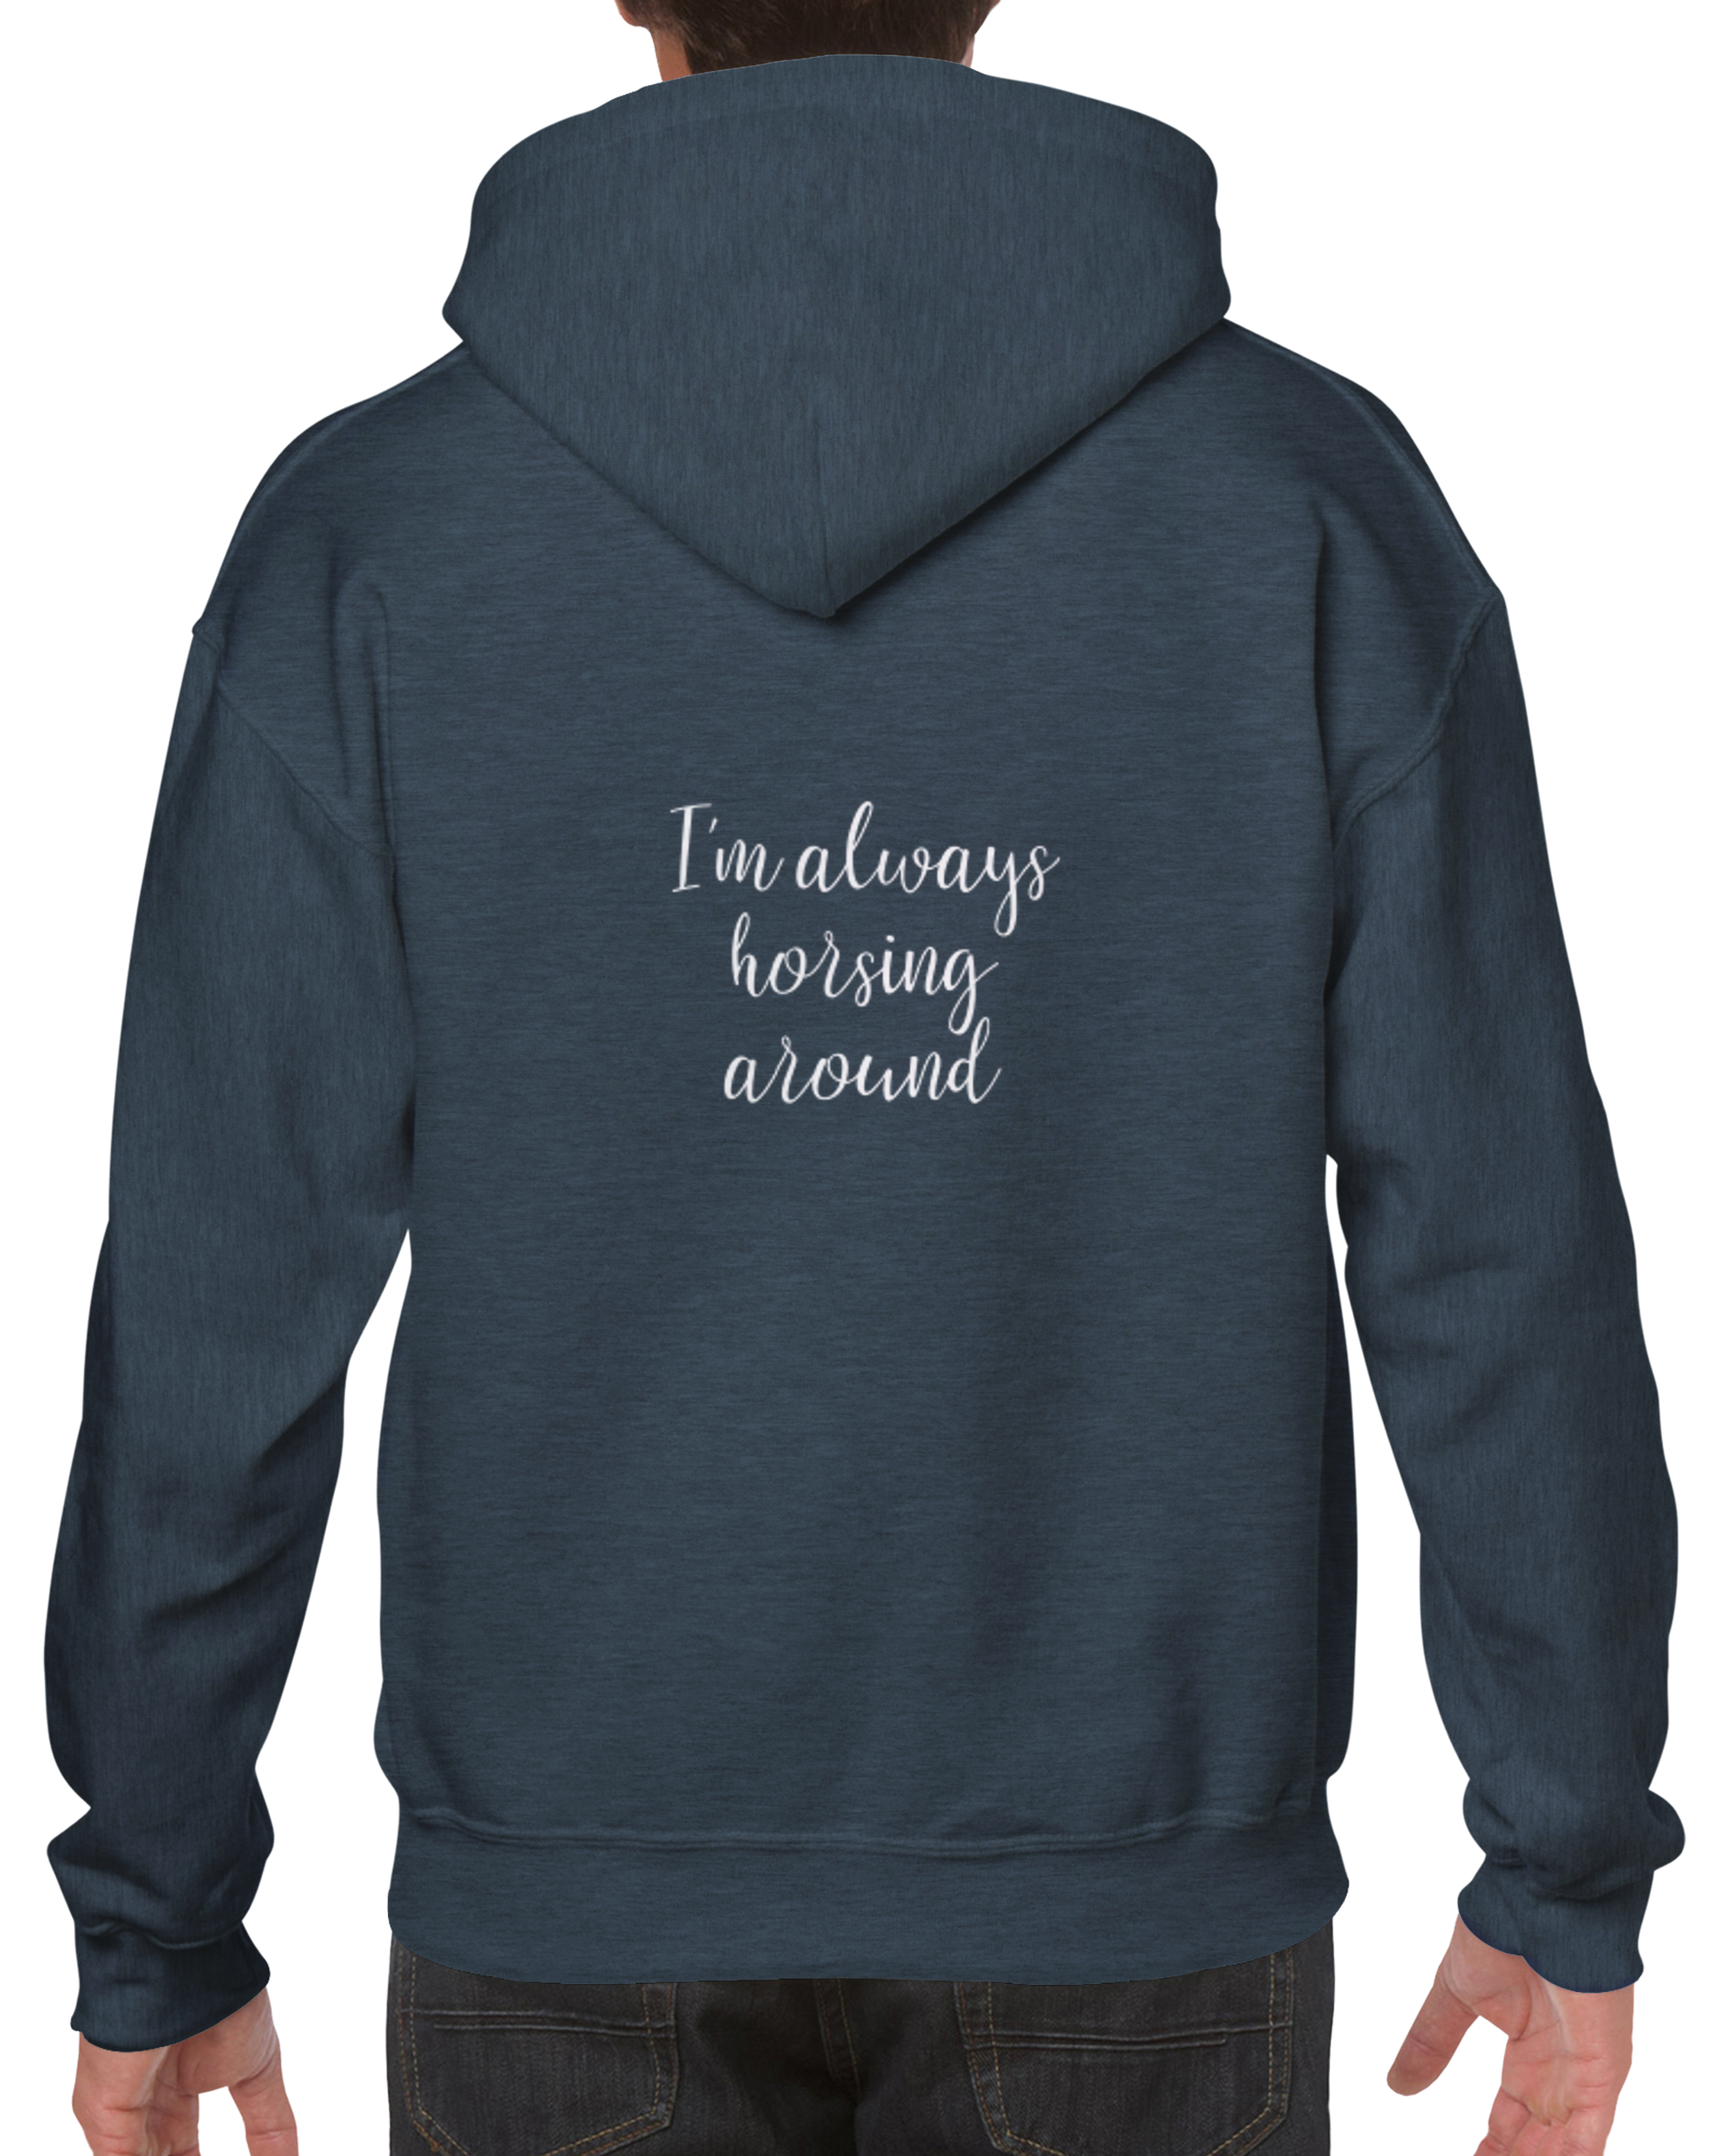 Hand Drawn Horse || Unisex Hoodie - Design: " FREEDOM "; Static Design; Personalizable Text